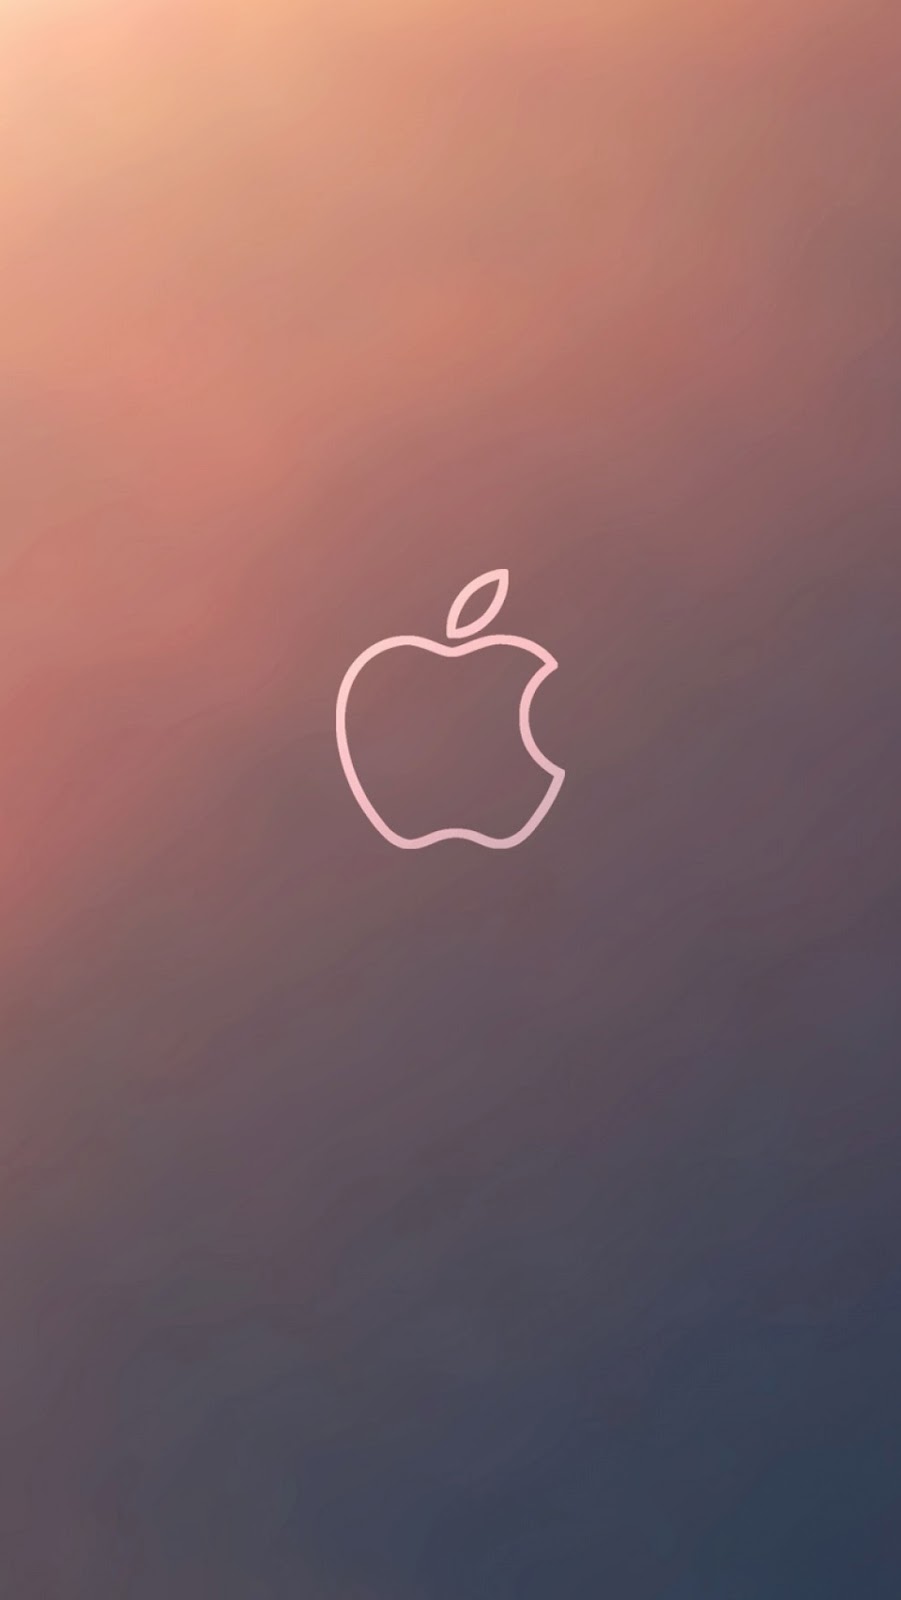 Download Wallpapers For Iphone 6